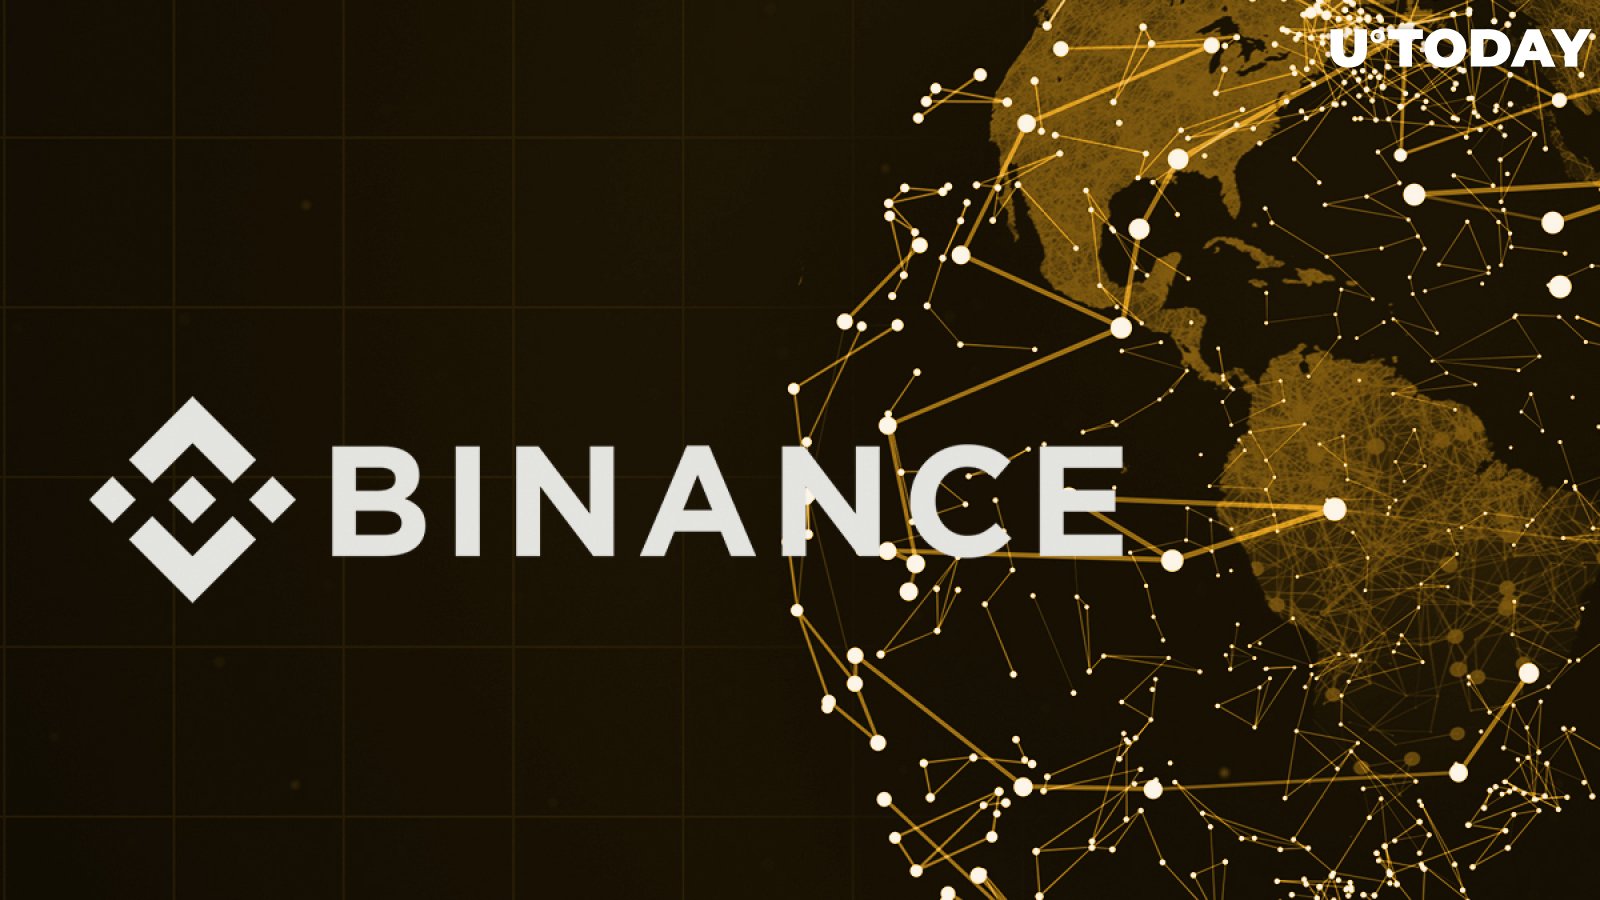 Binance Resumes Operating After Upgrading Its Spot Trading System That Took 2 Years to Prepare